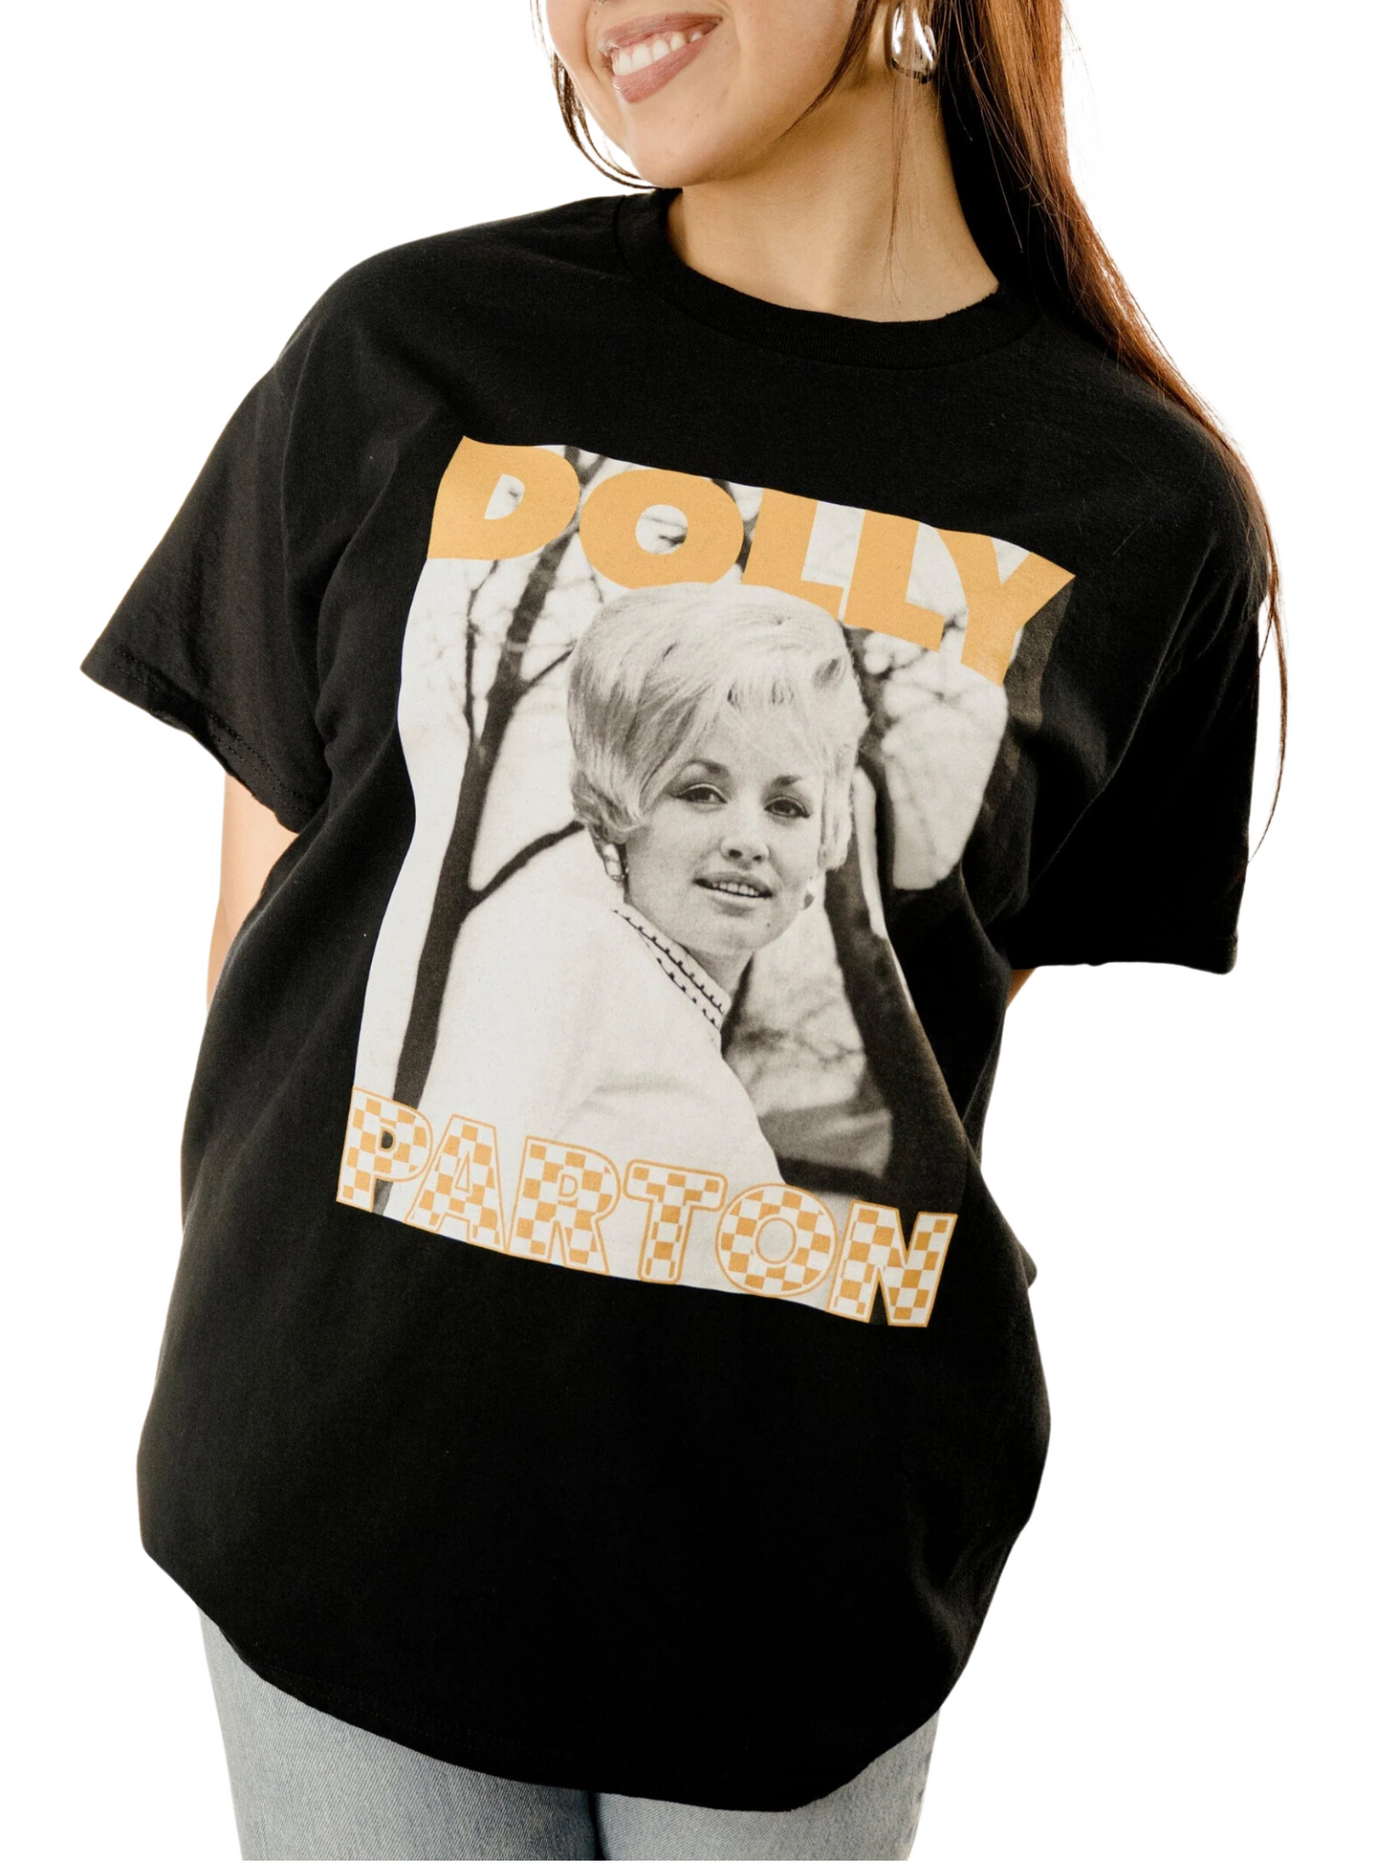 Dolly Parton Tennessee Checkerboard Thrifted Distressed Tee